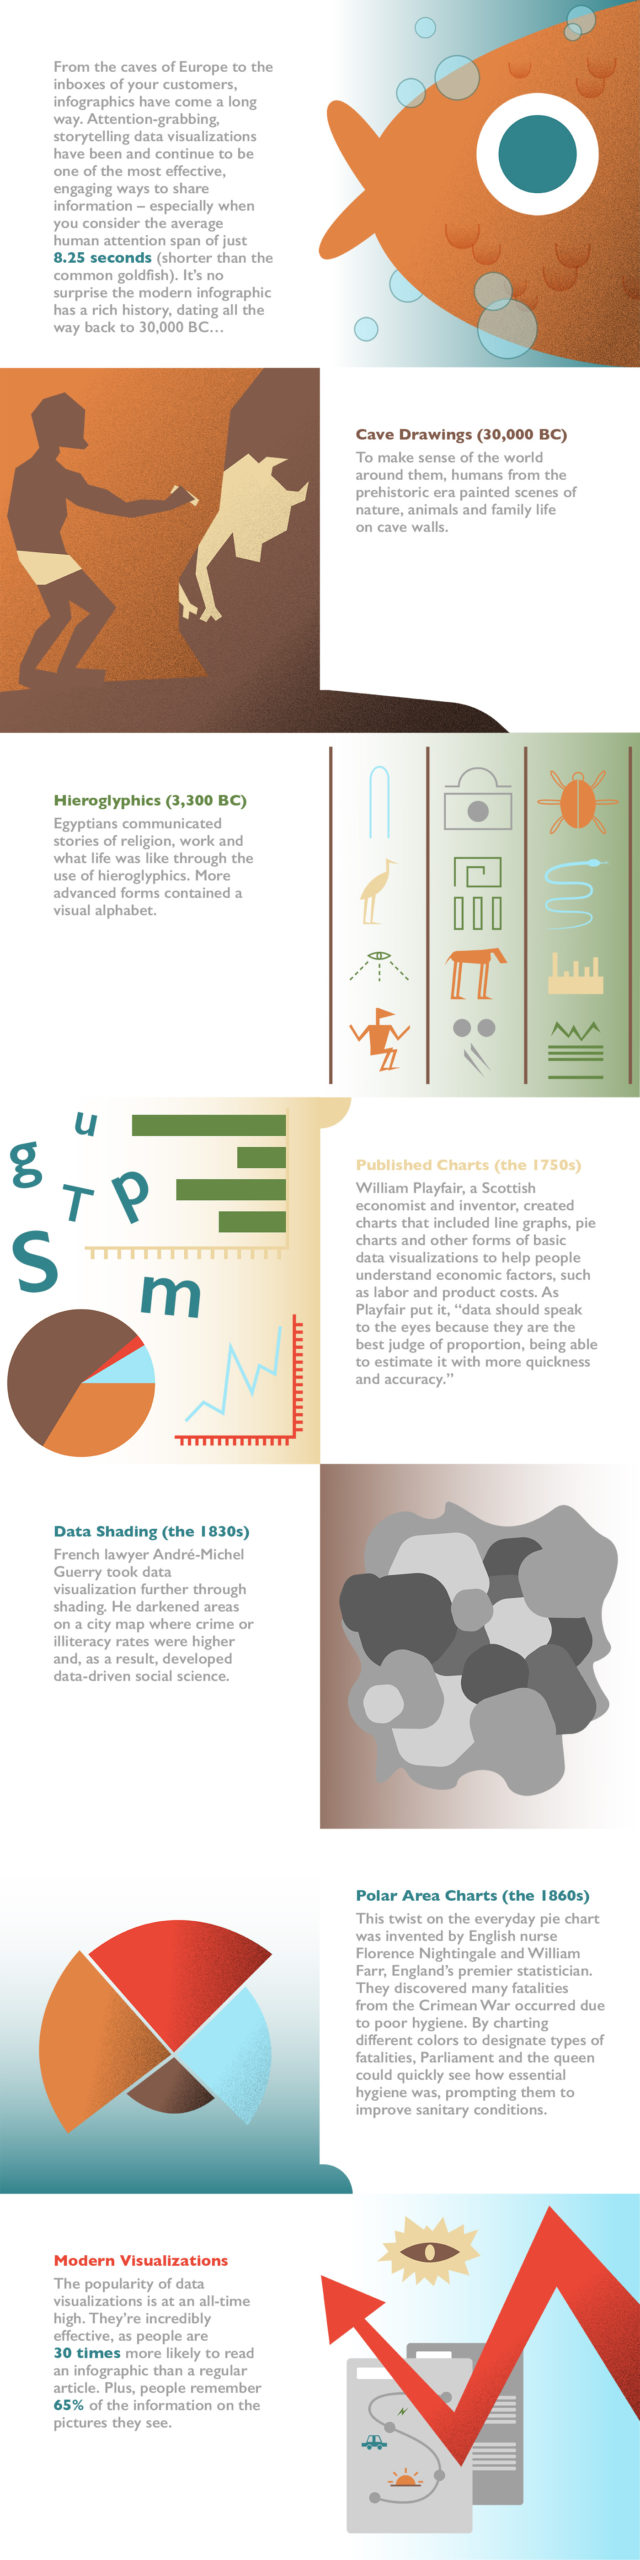 A Look Back At The History Of Infographics Questline Digital